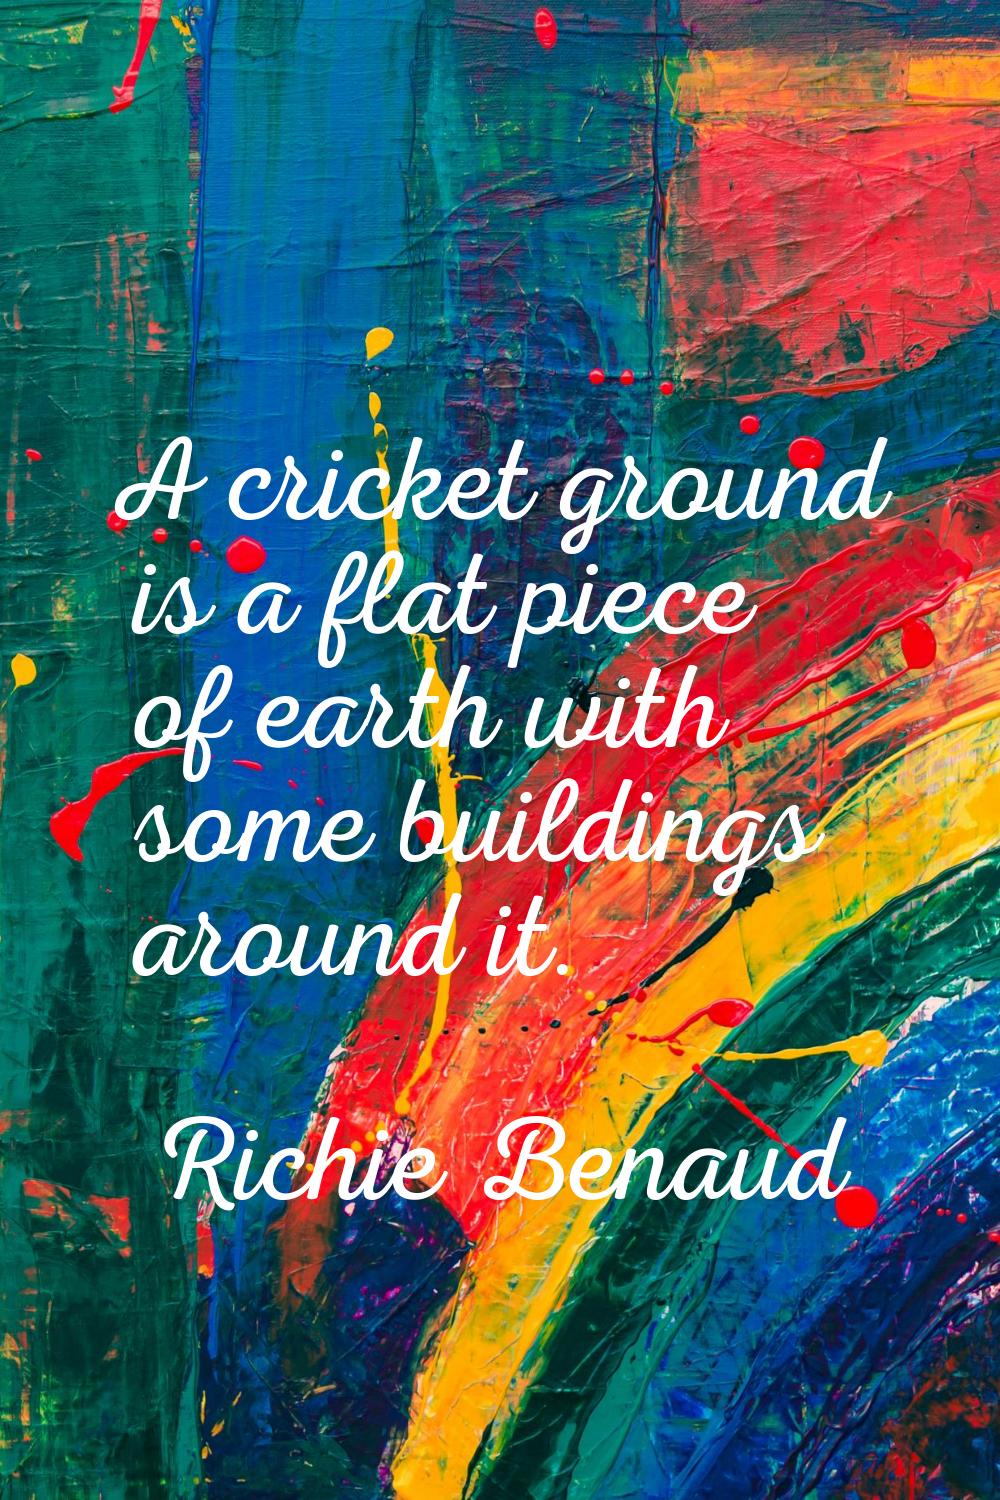 A cricket ground is a flat piece of earth with some buildings around it.